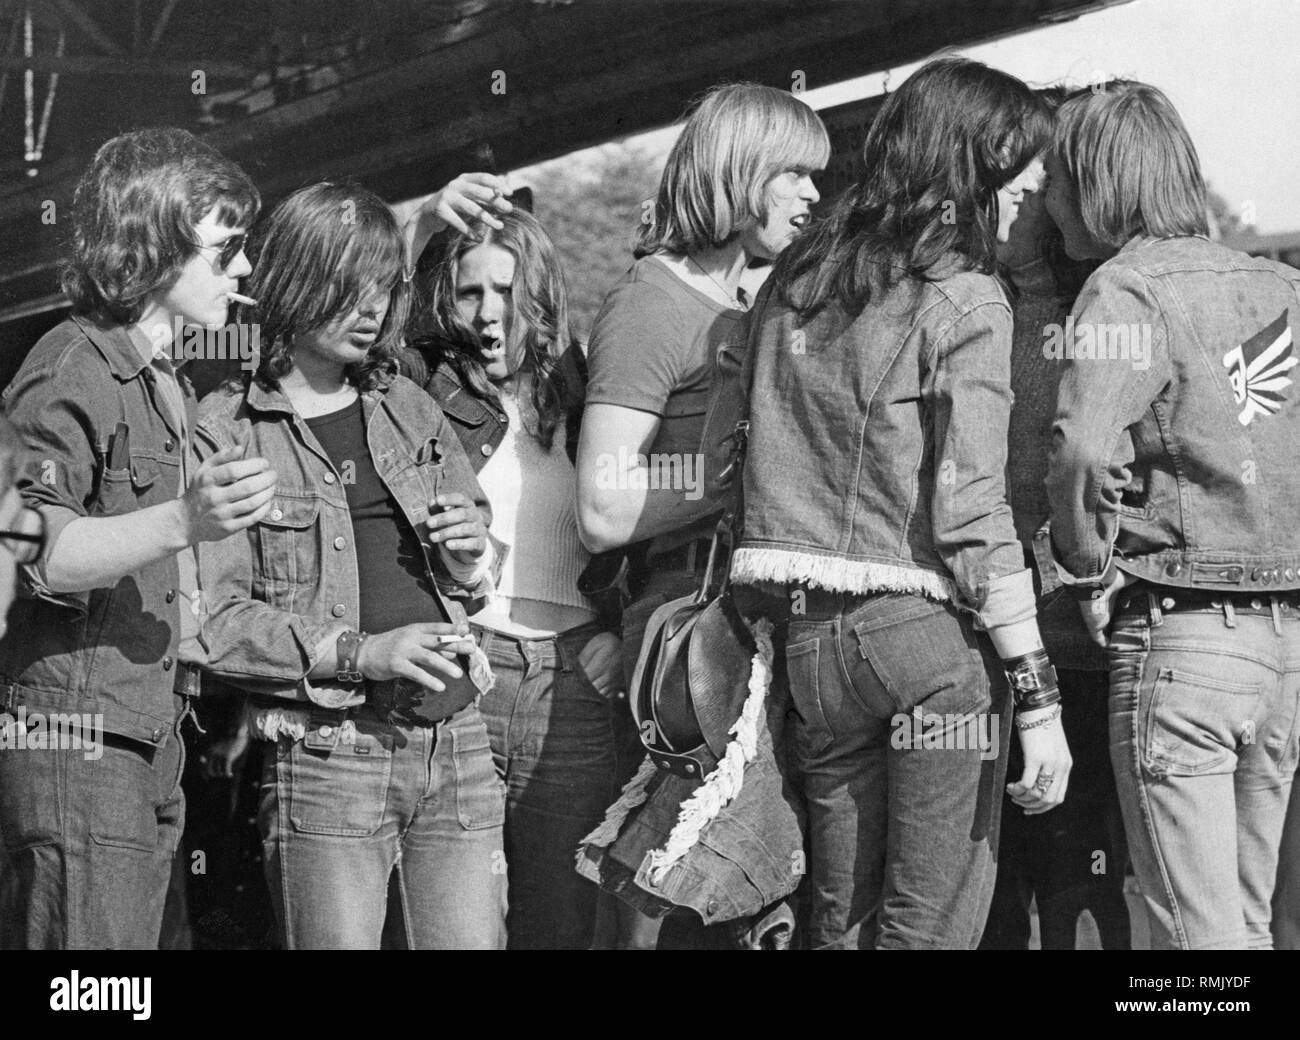 Teenagers, mostly wearing denim, stand in a group. Stock Photo